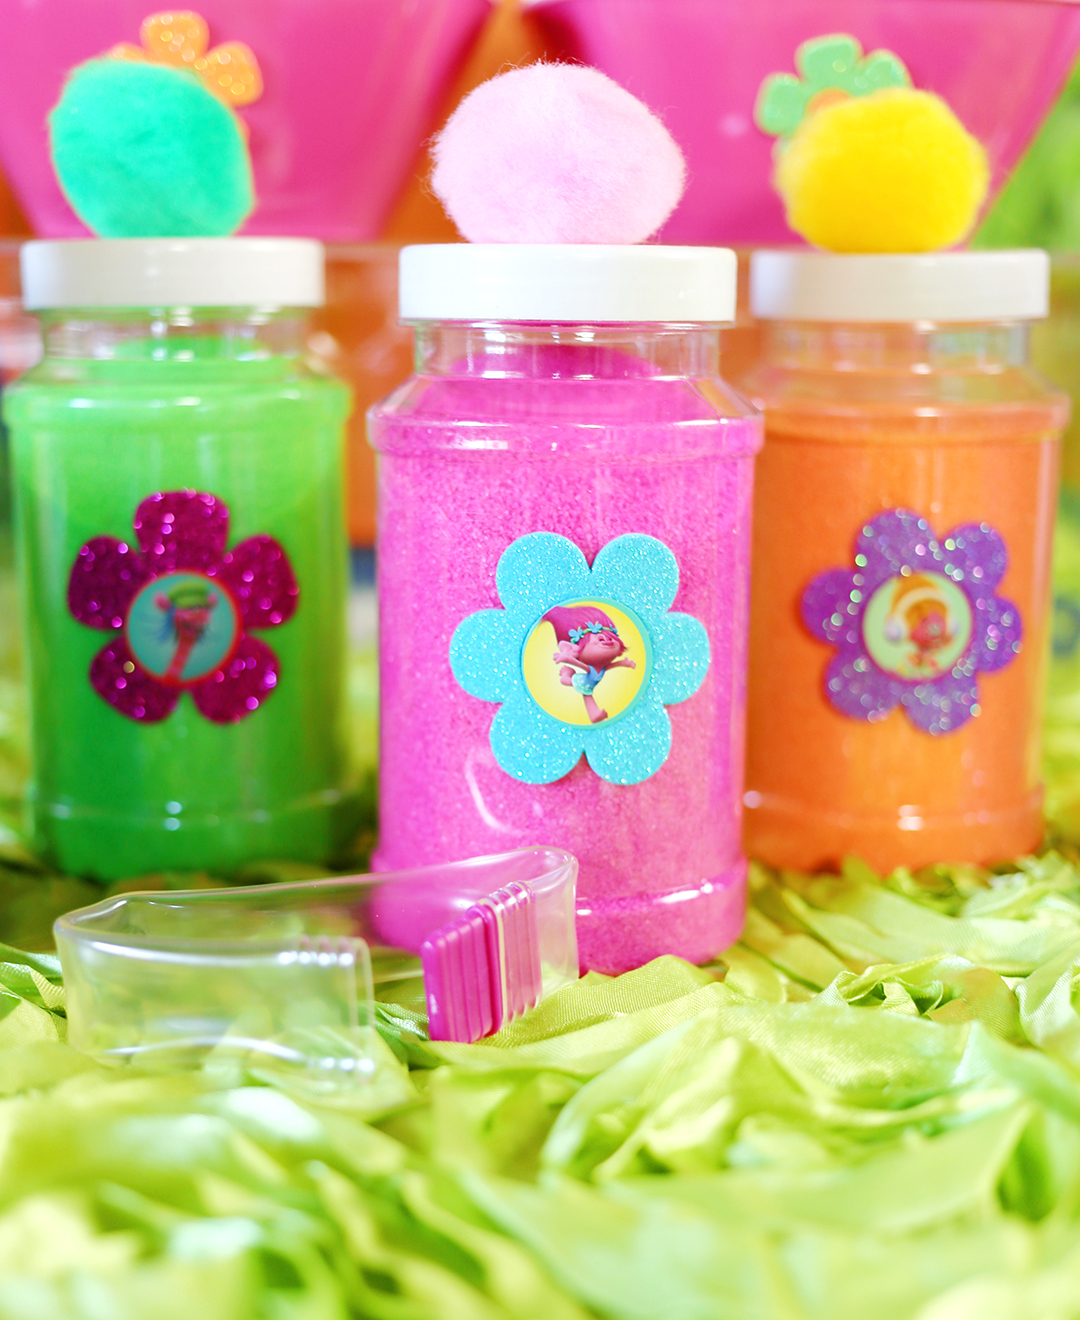 TREND ALERT - Host a Trolls Party with these Trolls Party ...